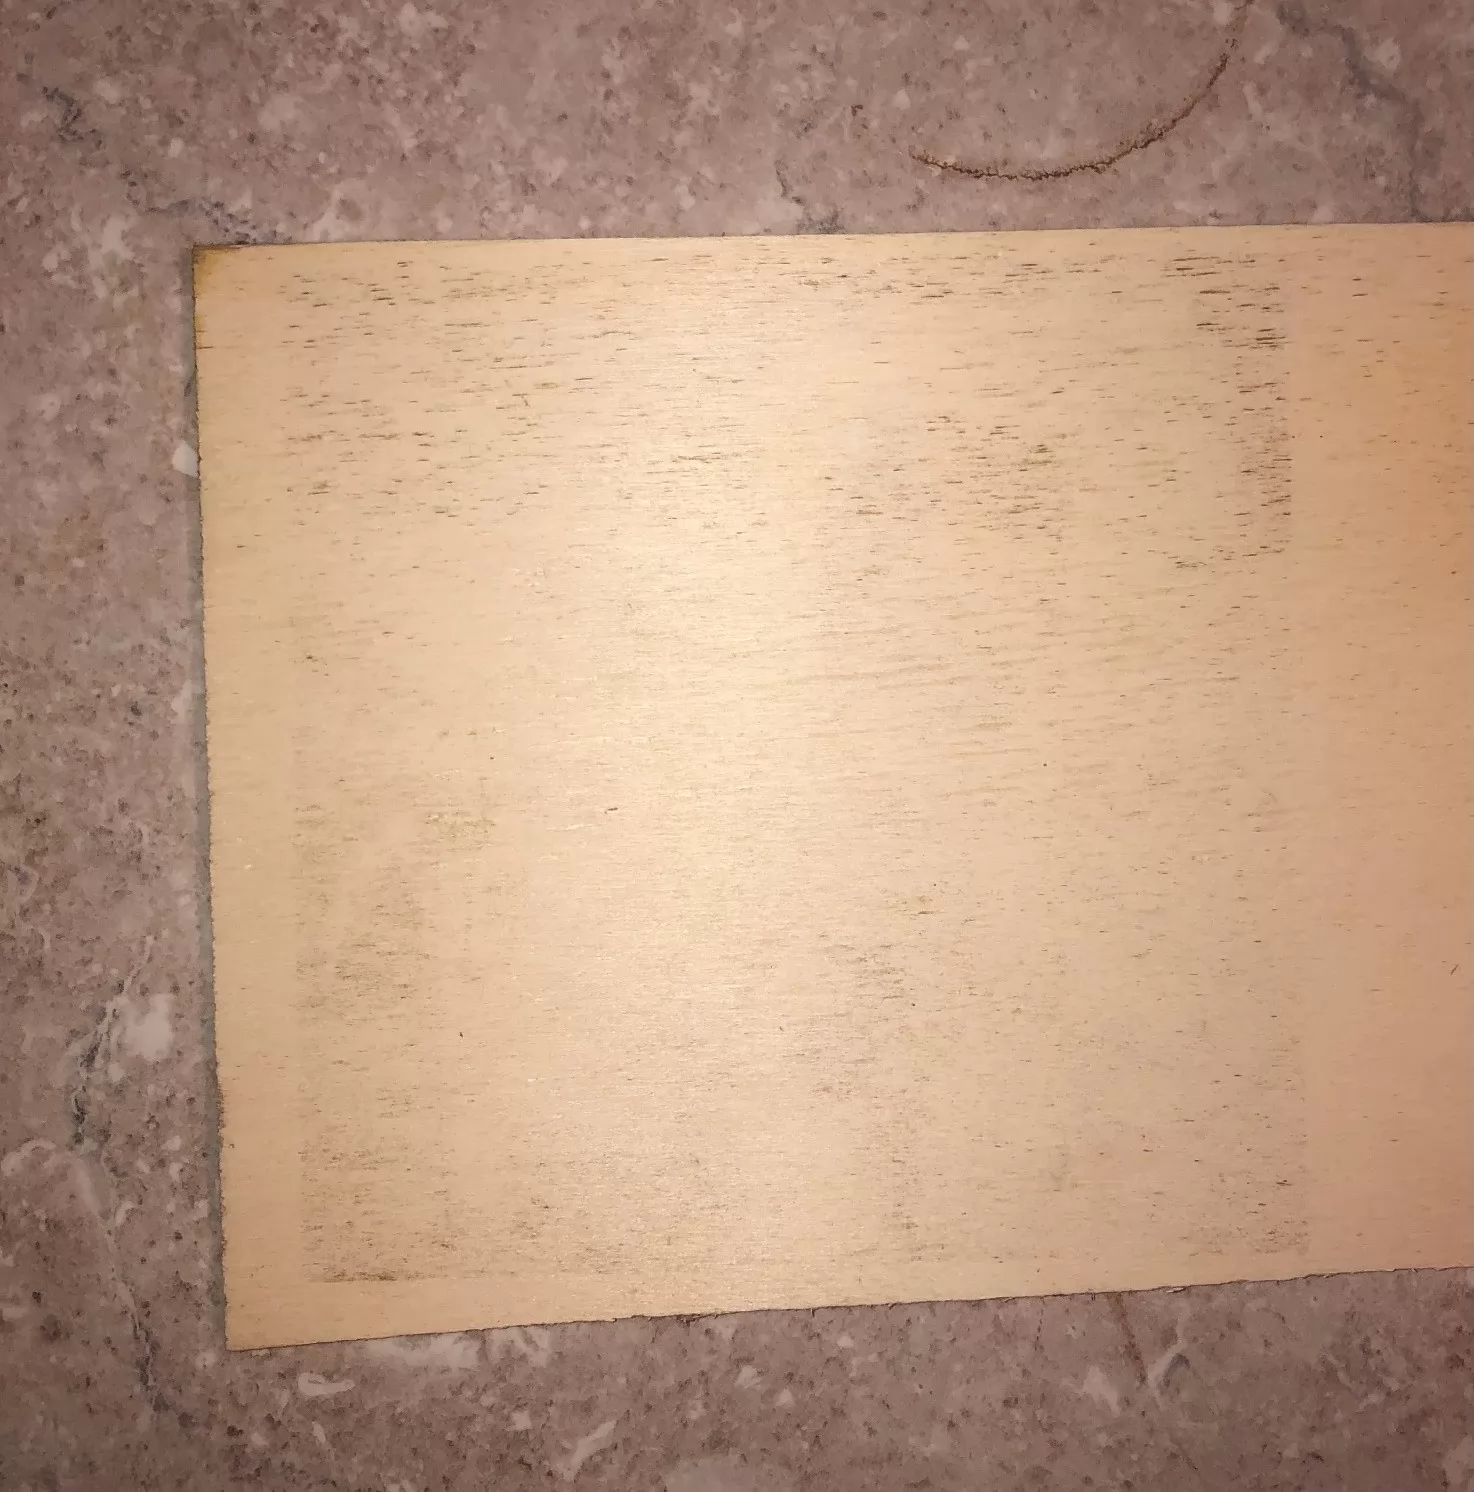 Photo laser engraving on wood, plywood. How to make it yourself.